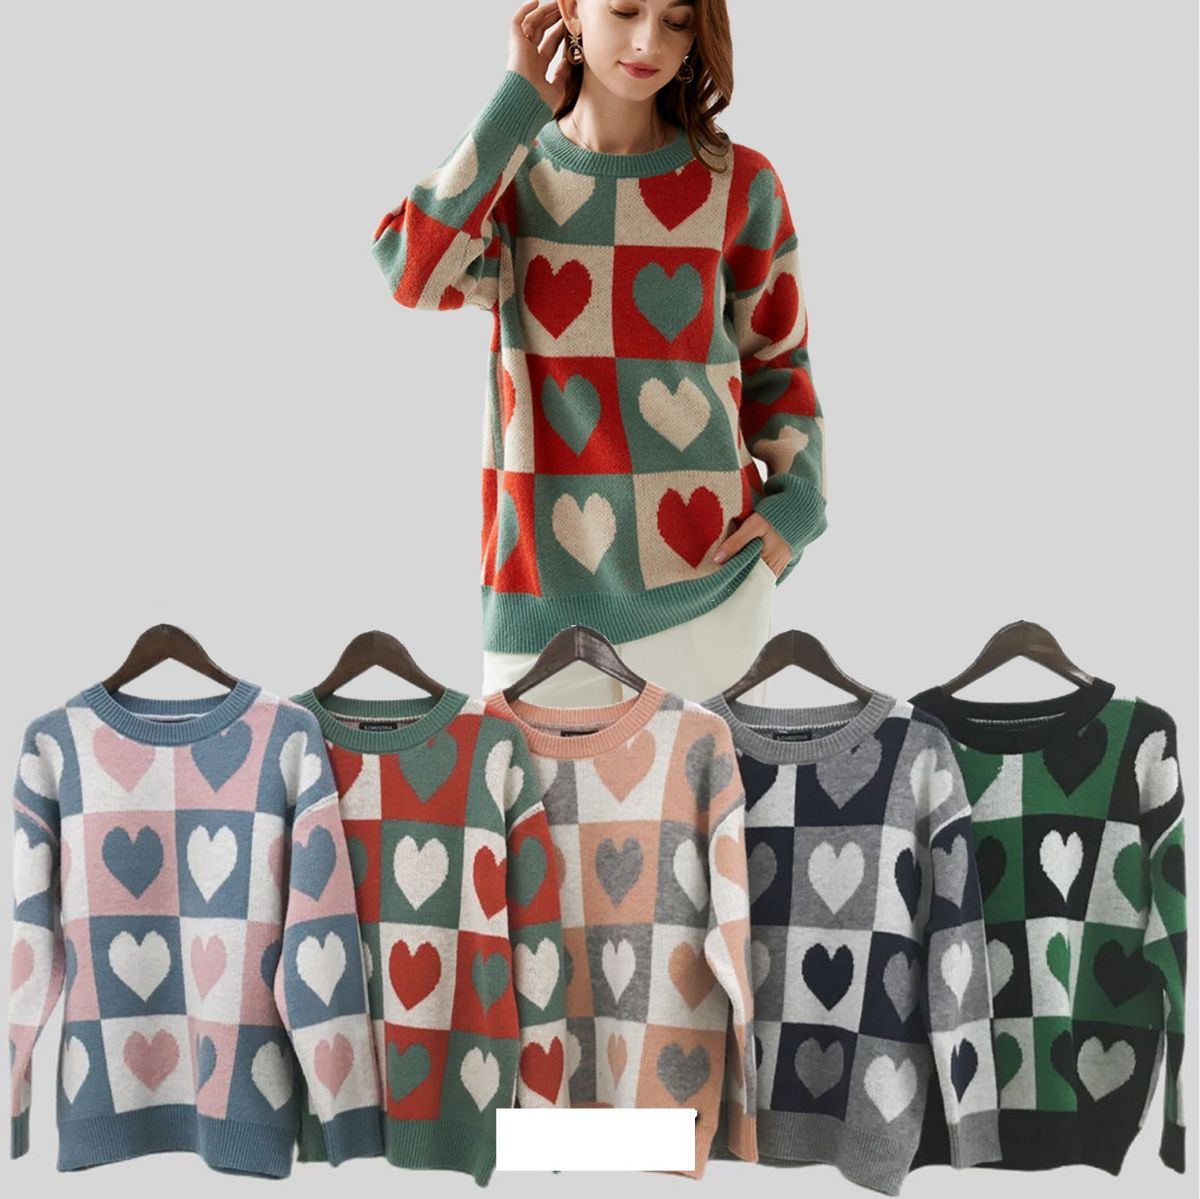 12 Pieces of Knitted Cashmere Baggy Sweater Checker Hearts Design S/m